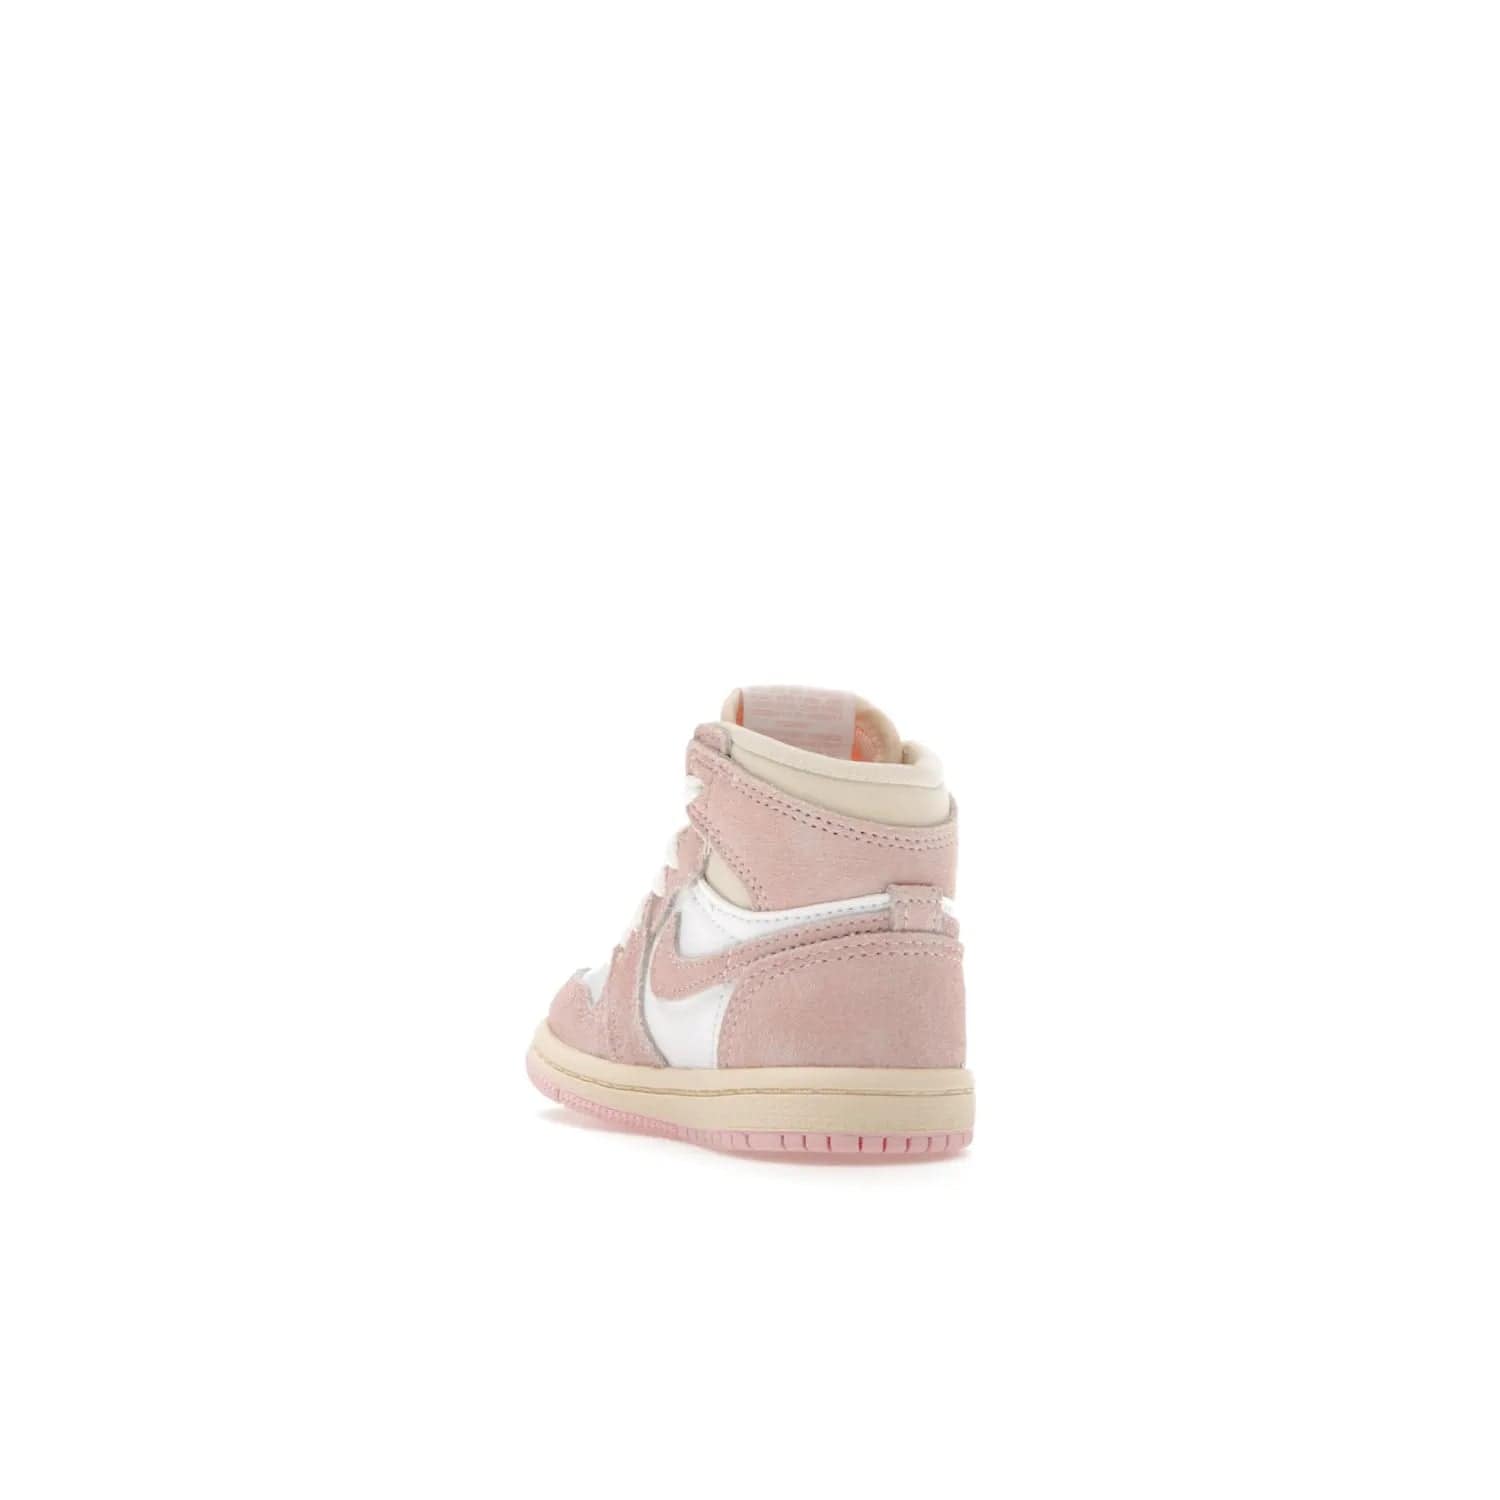 Jordan 1 Retro High OG Washed Pink (TD) - Image 25 - Only at www.BallersClubKickz.com - Retro style meets modern comfort: Introducing the Jordan 1 High OG Washed Pink (TD). Combining Atmosphere/White/Muslin/Sail colors with a high-rise silhouette, these shoes will be an instant classic when they release April 22, 2023.